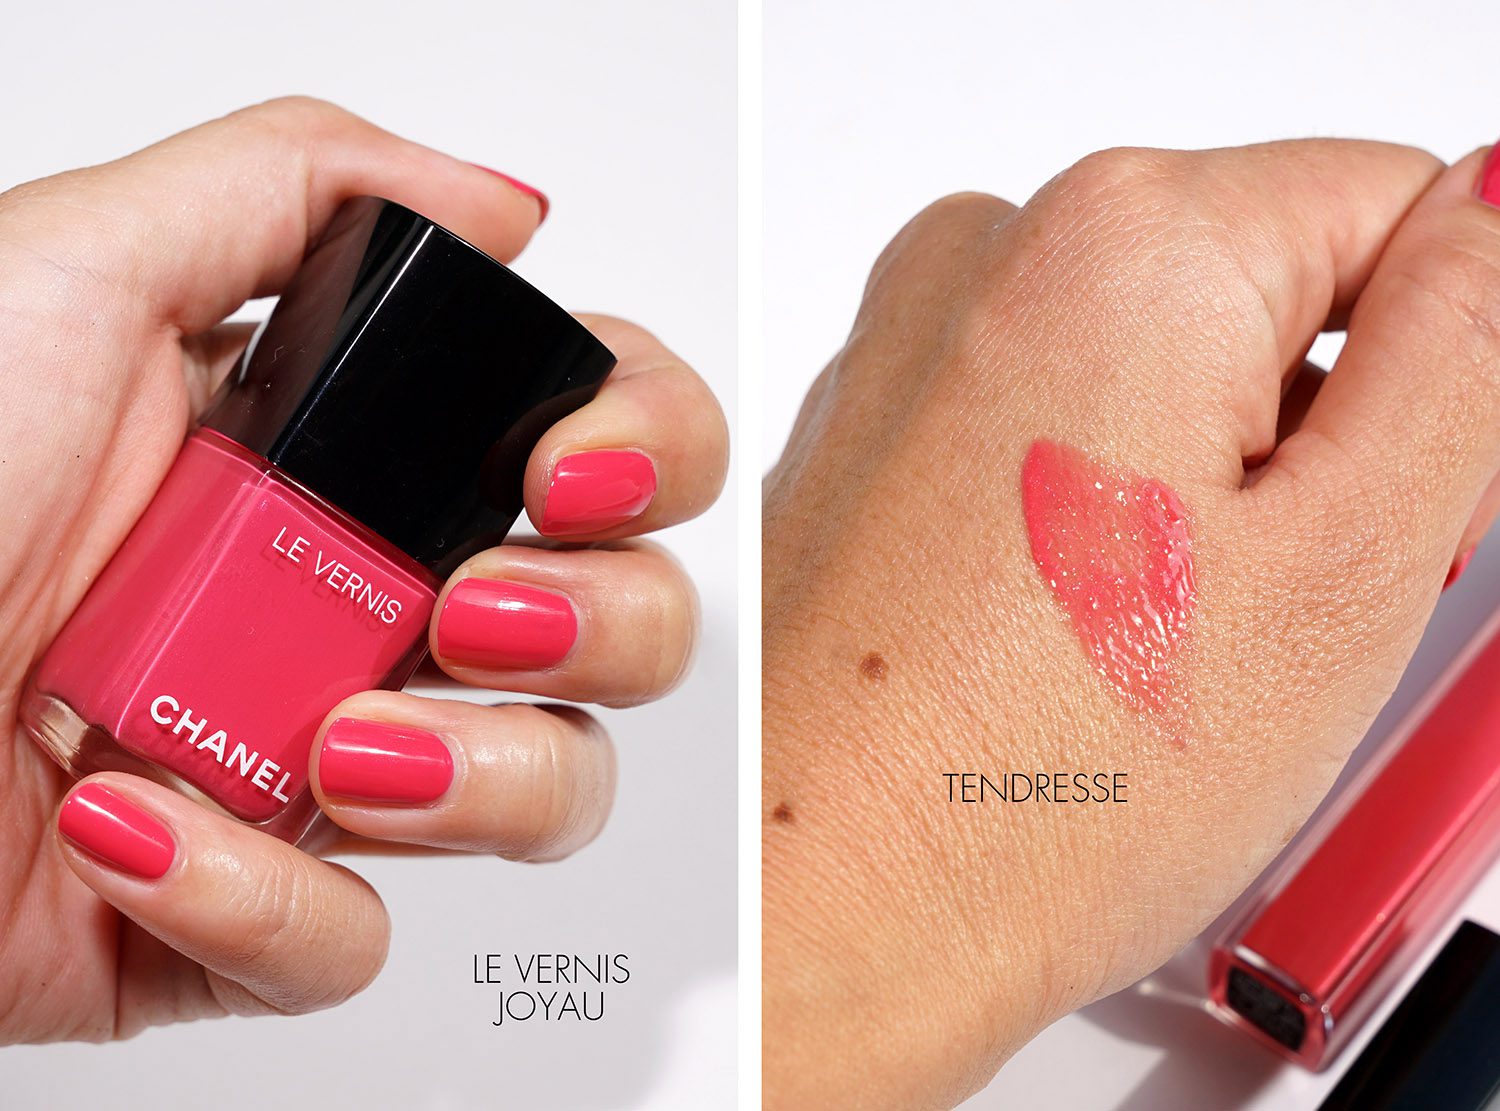 Top 10 Chanel Le Vernis Nail Shades + Lip Colors to Match - The Beauty Look  Book